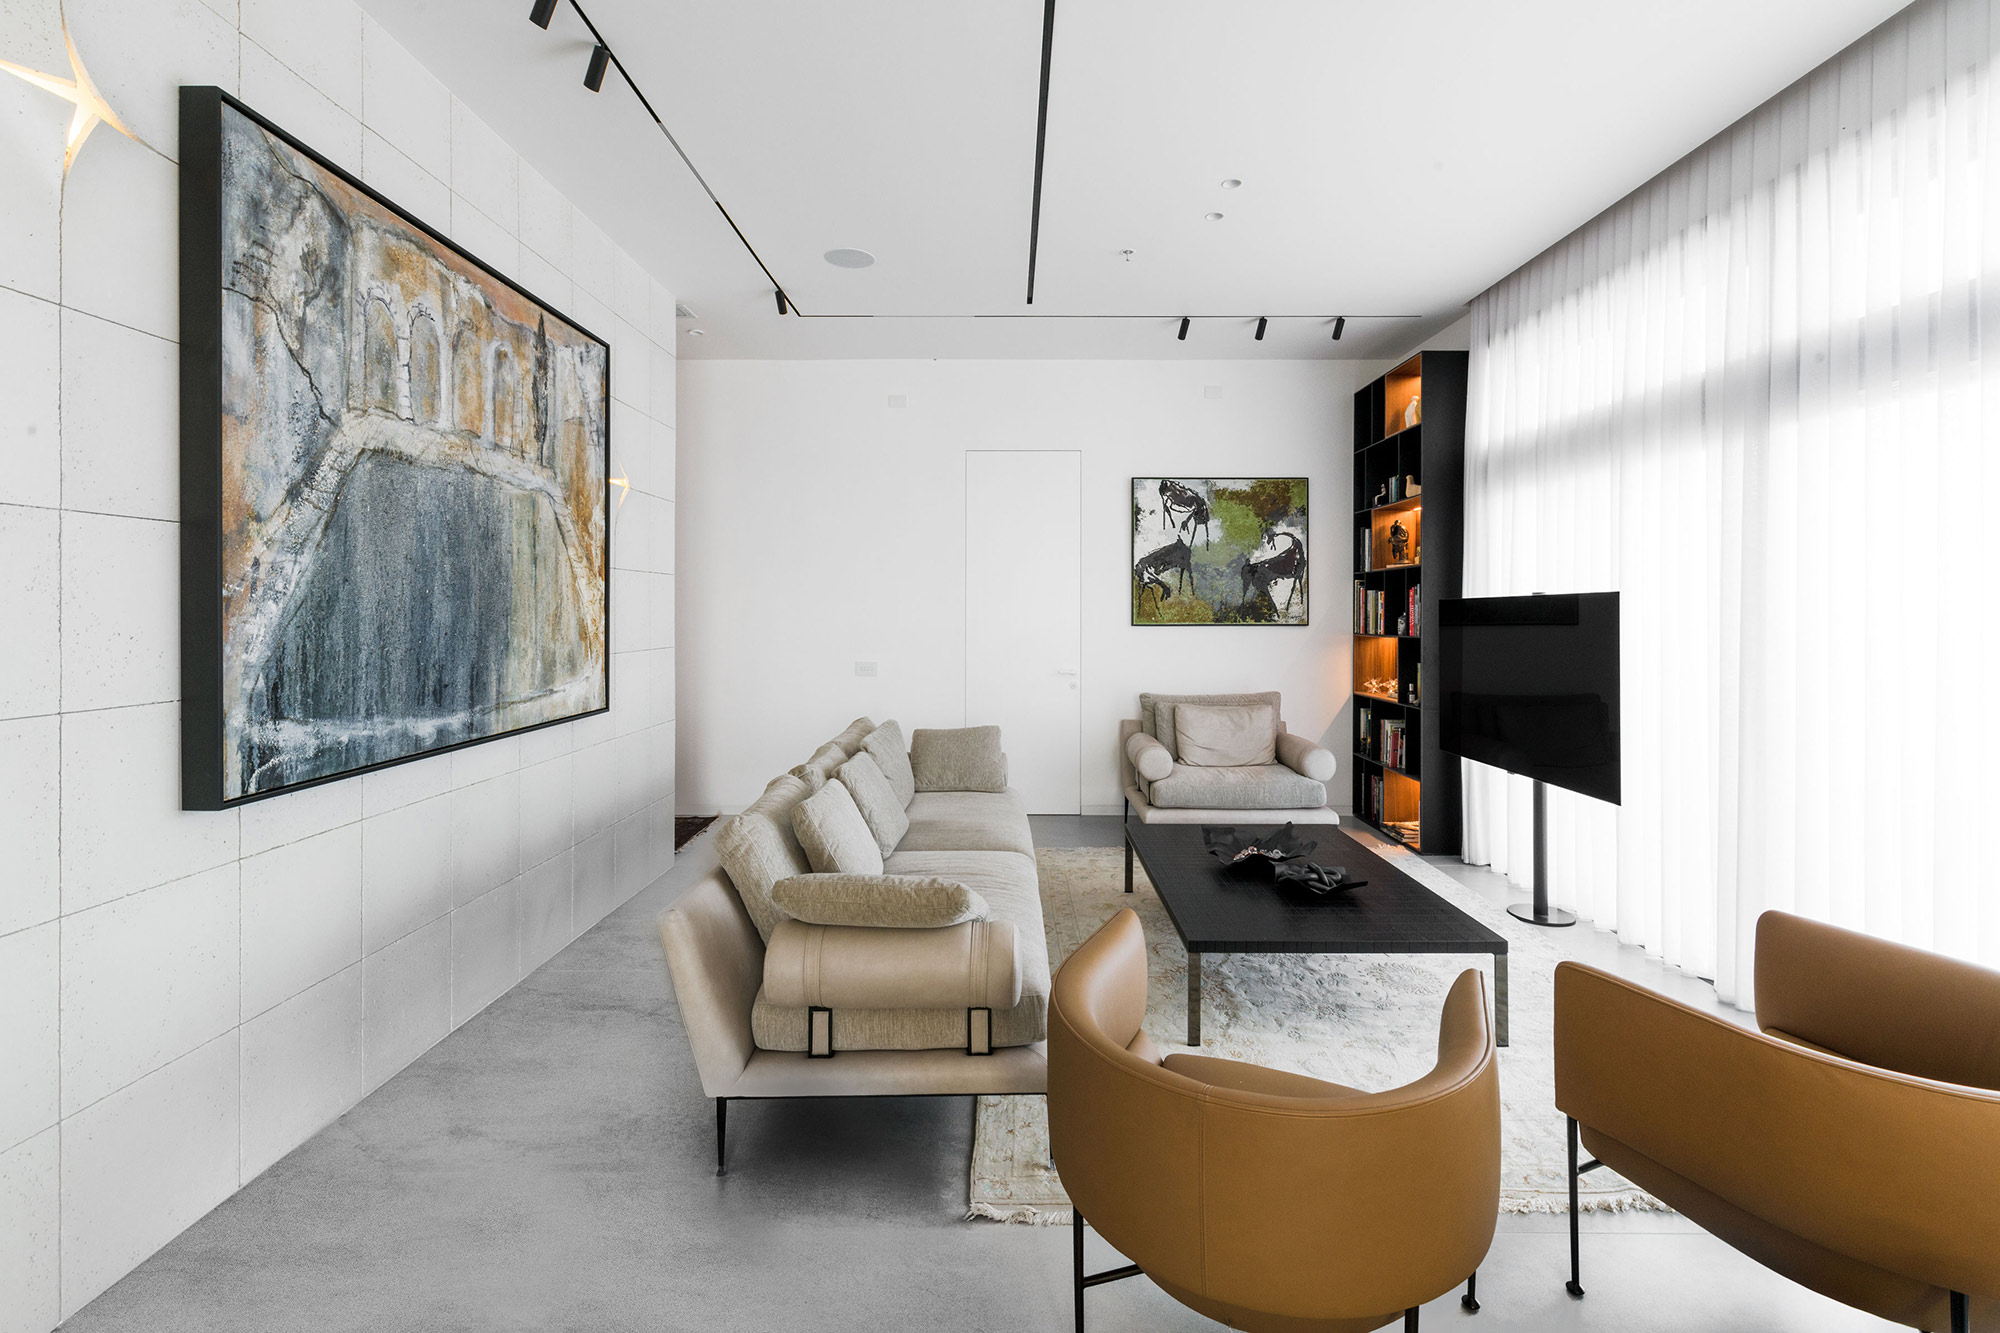 Image of Apartment in Tel Aviv Zissy Hatsubai 12 in An urban and sophisticated loft with elegant surfaces in white, black and wood - Cosentino